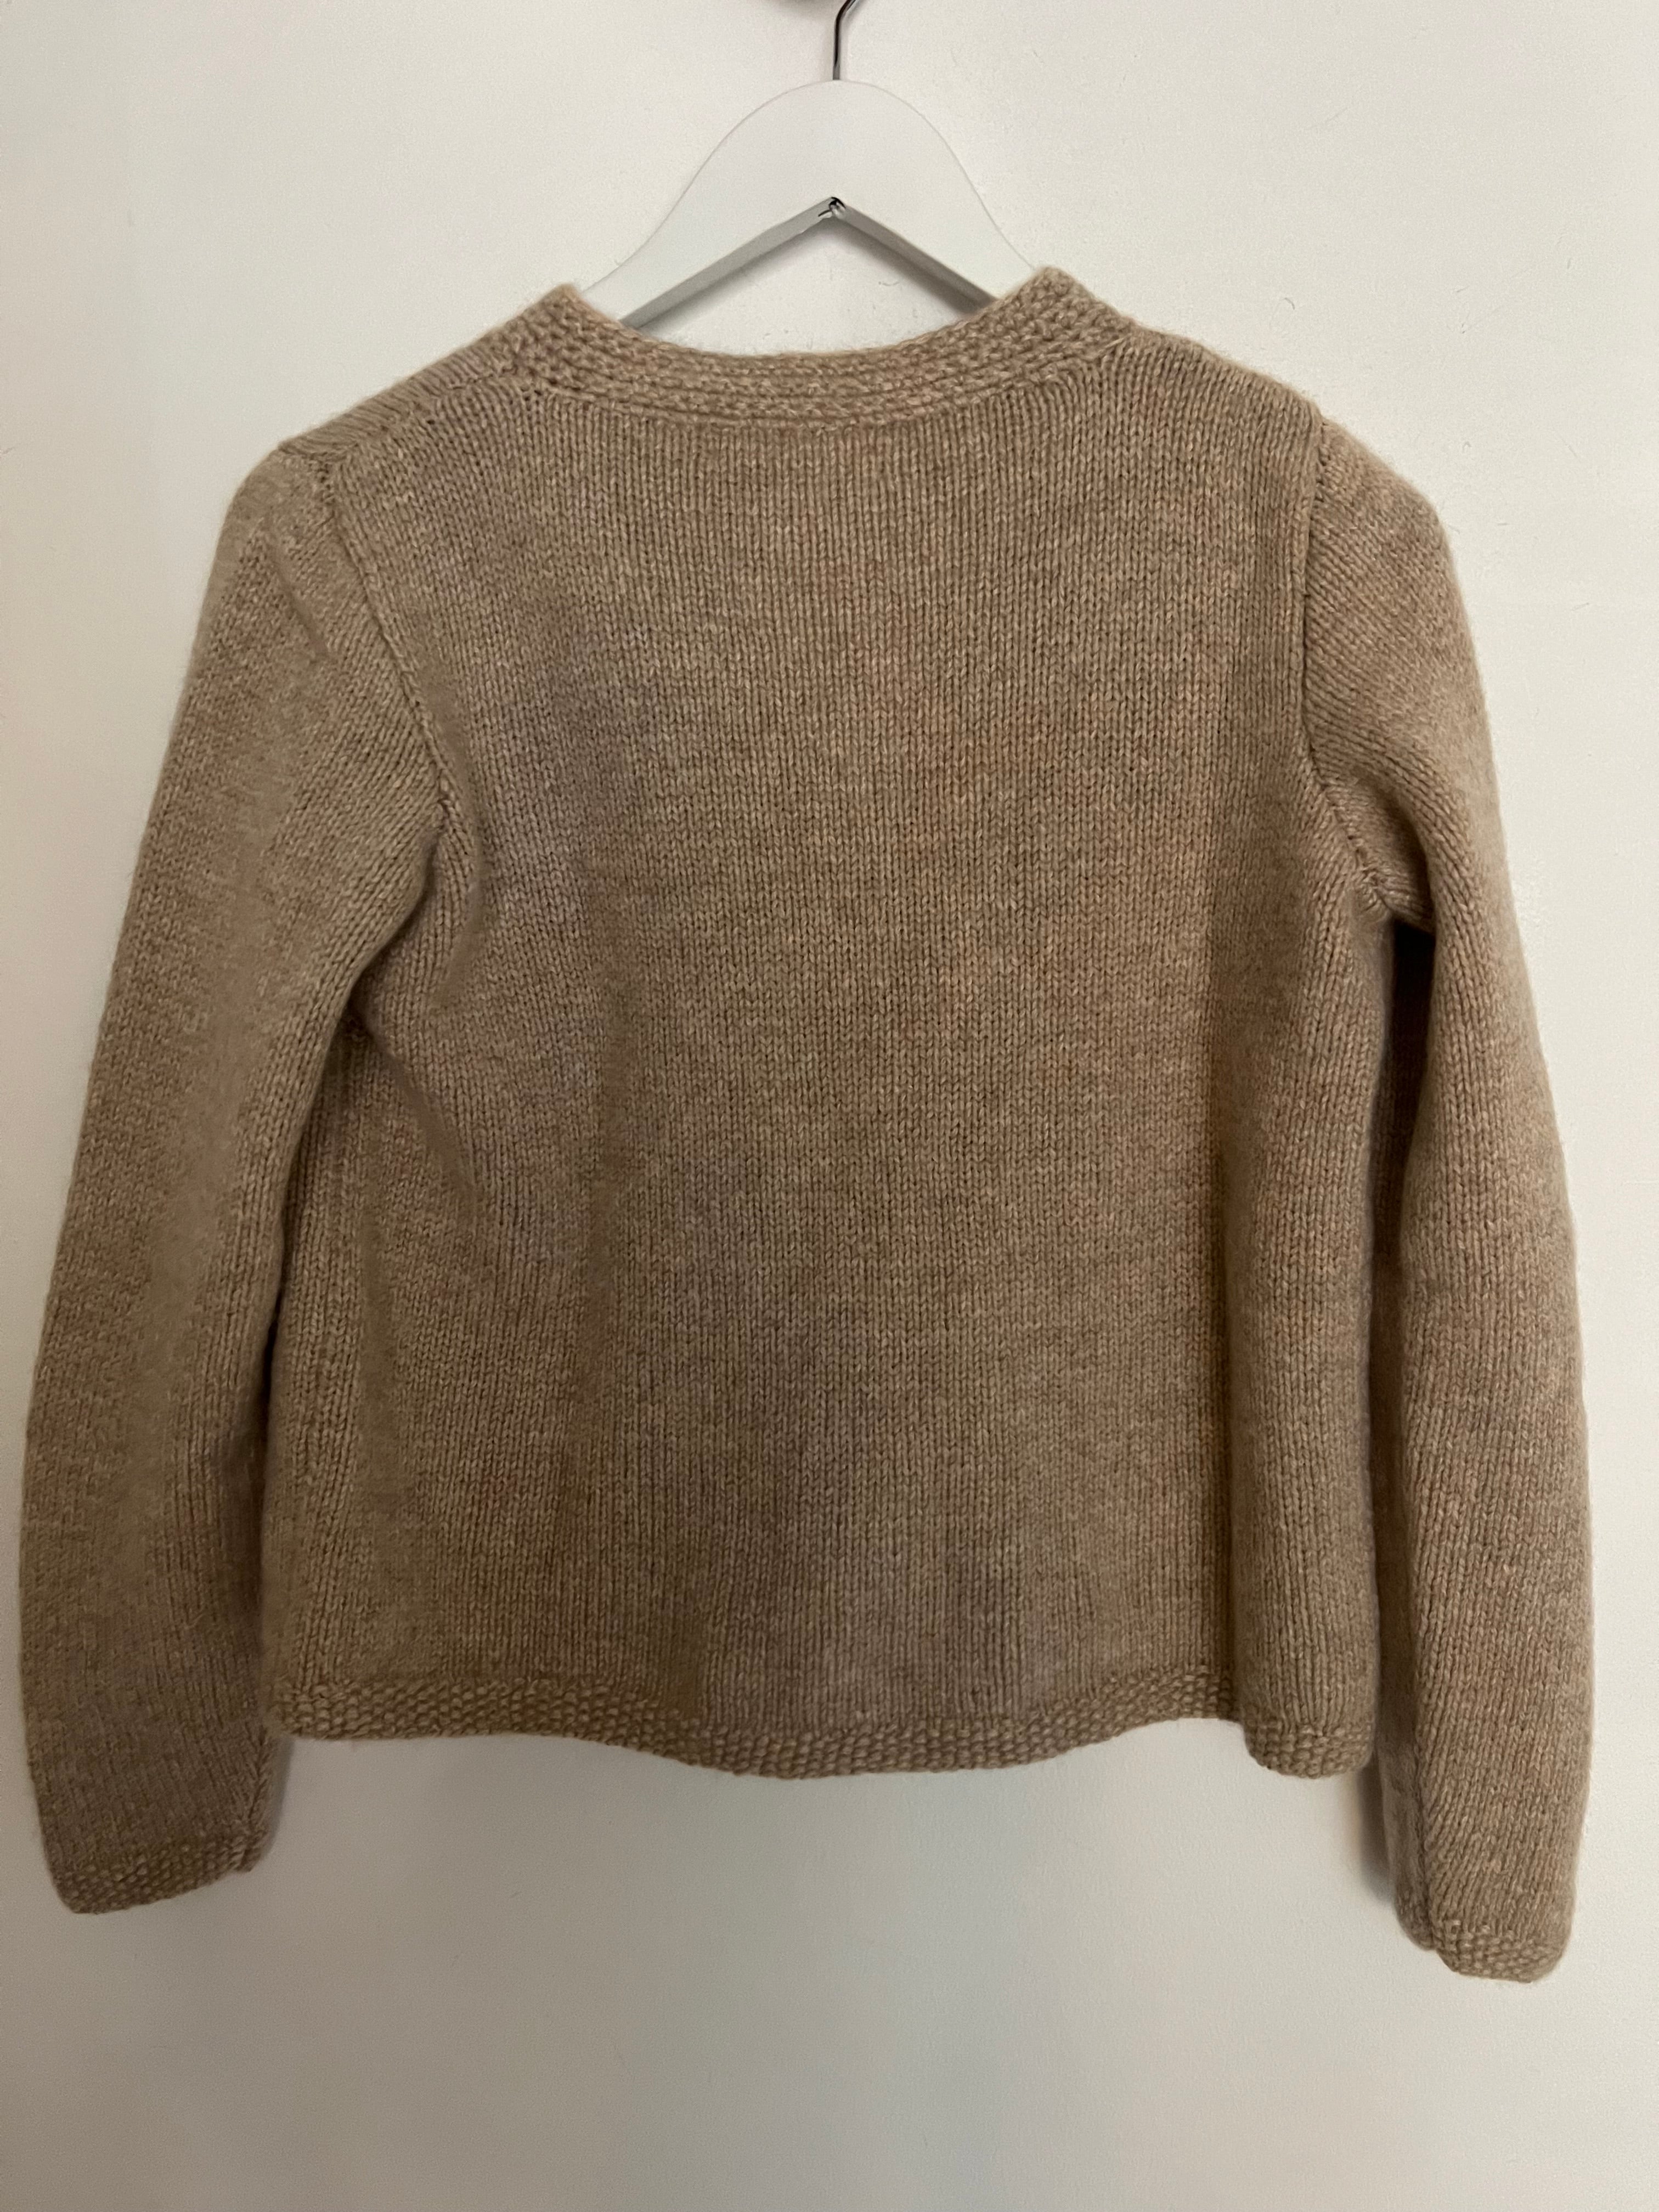 Hetre Alresford Hampshire Clothes Store English Weather Oatmeal Cashmere Cardigan 